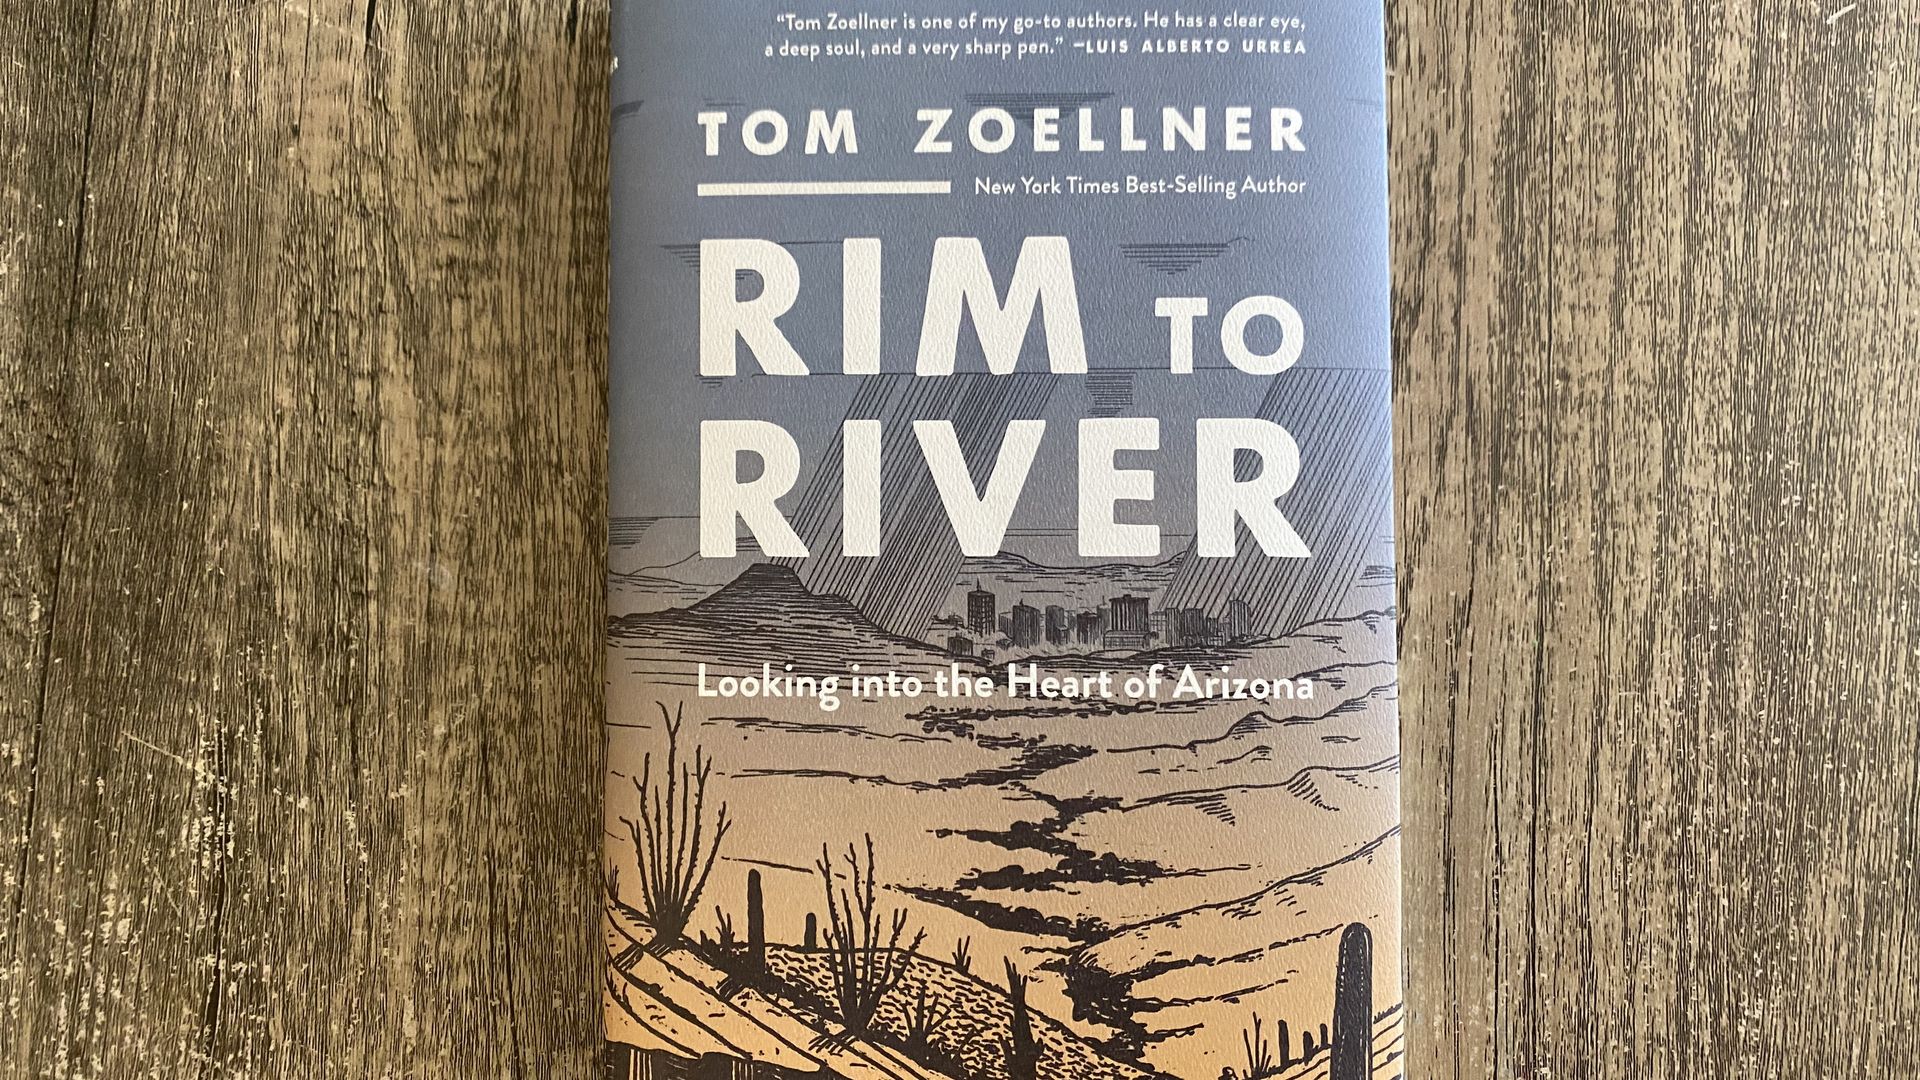 A hardcover book titled Rim To River on a gray wood-grained surface.